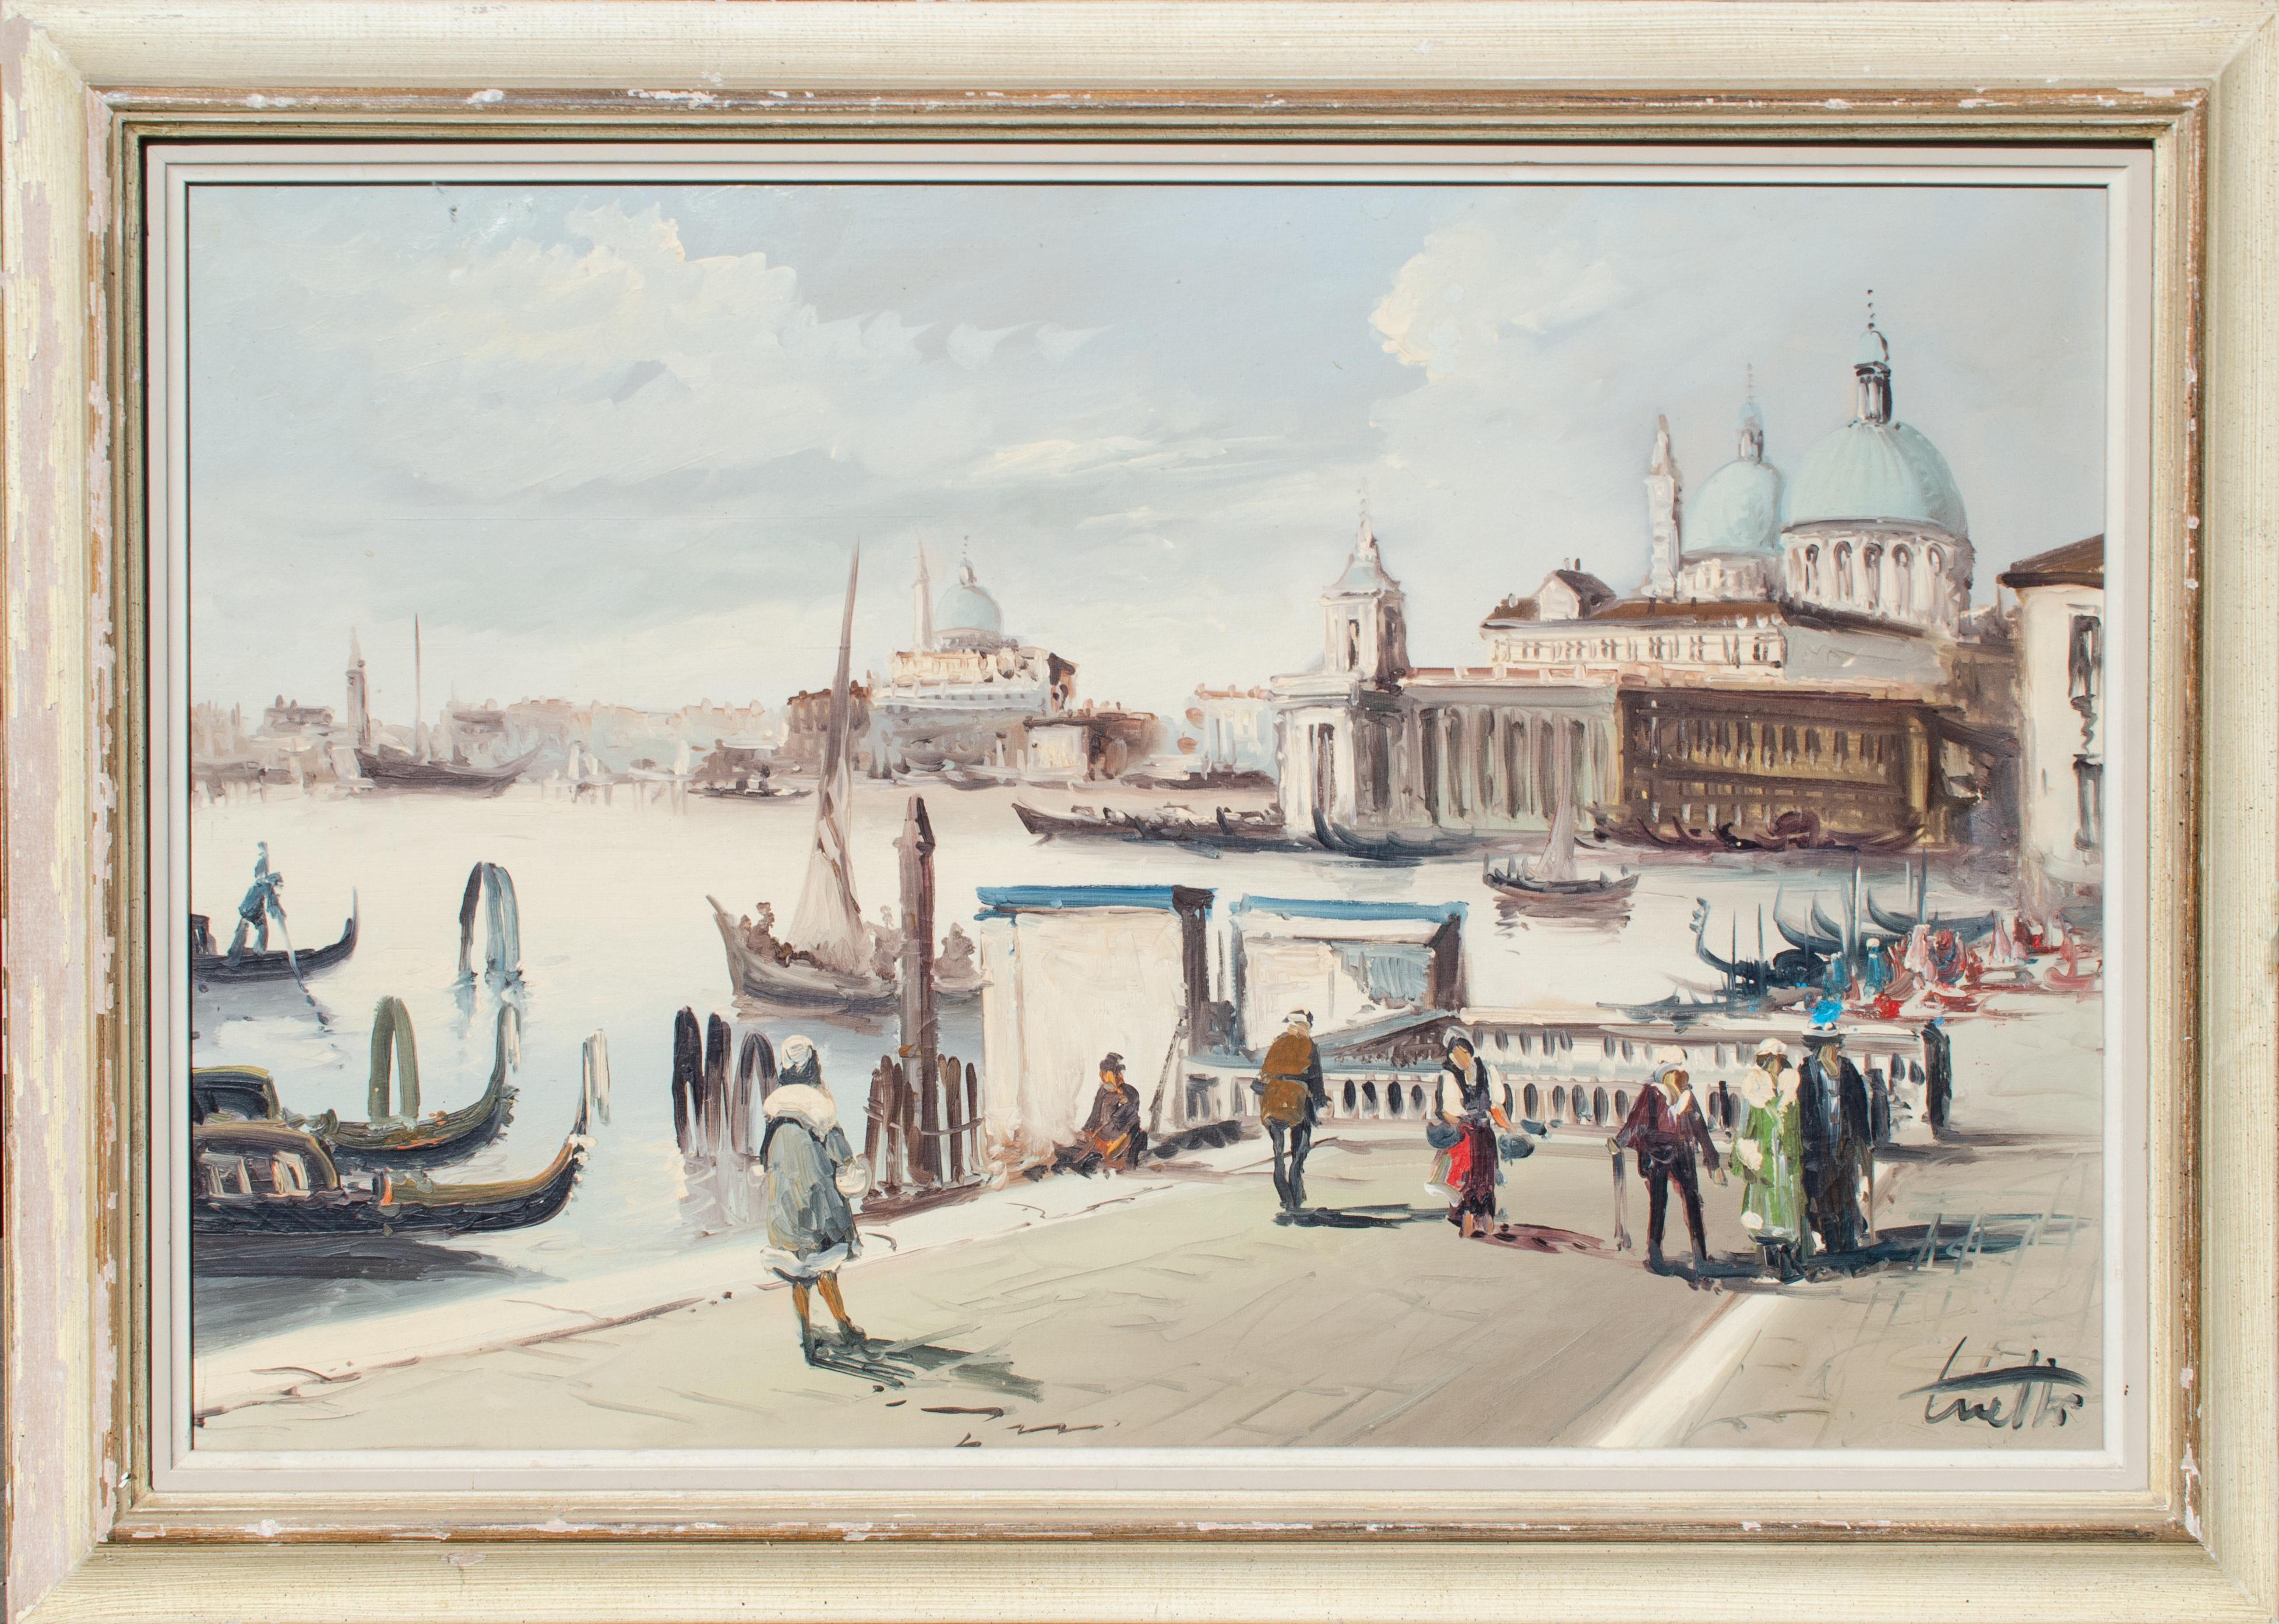 Pietro Lietti (Italian, b. 1928)
Untitled, c. 20th Century
Oil on canvas
24 x 36 in. 
Framed: 30 5/8 x 42 1/2 x 2 in.
Signed lower right

Pietro Lietti is an Italian artist who has participated in numerous international exhibitions. He has exported